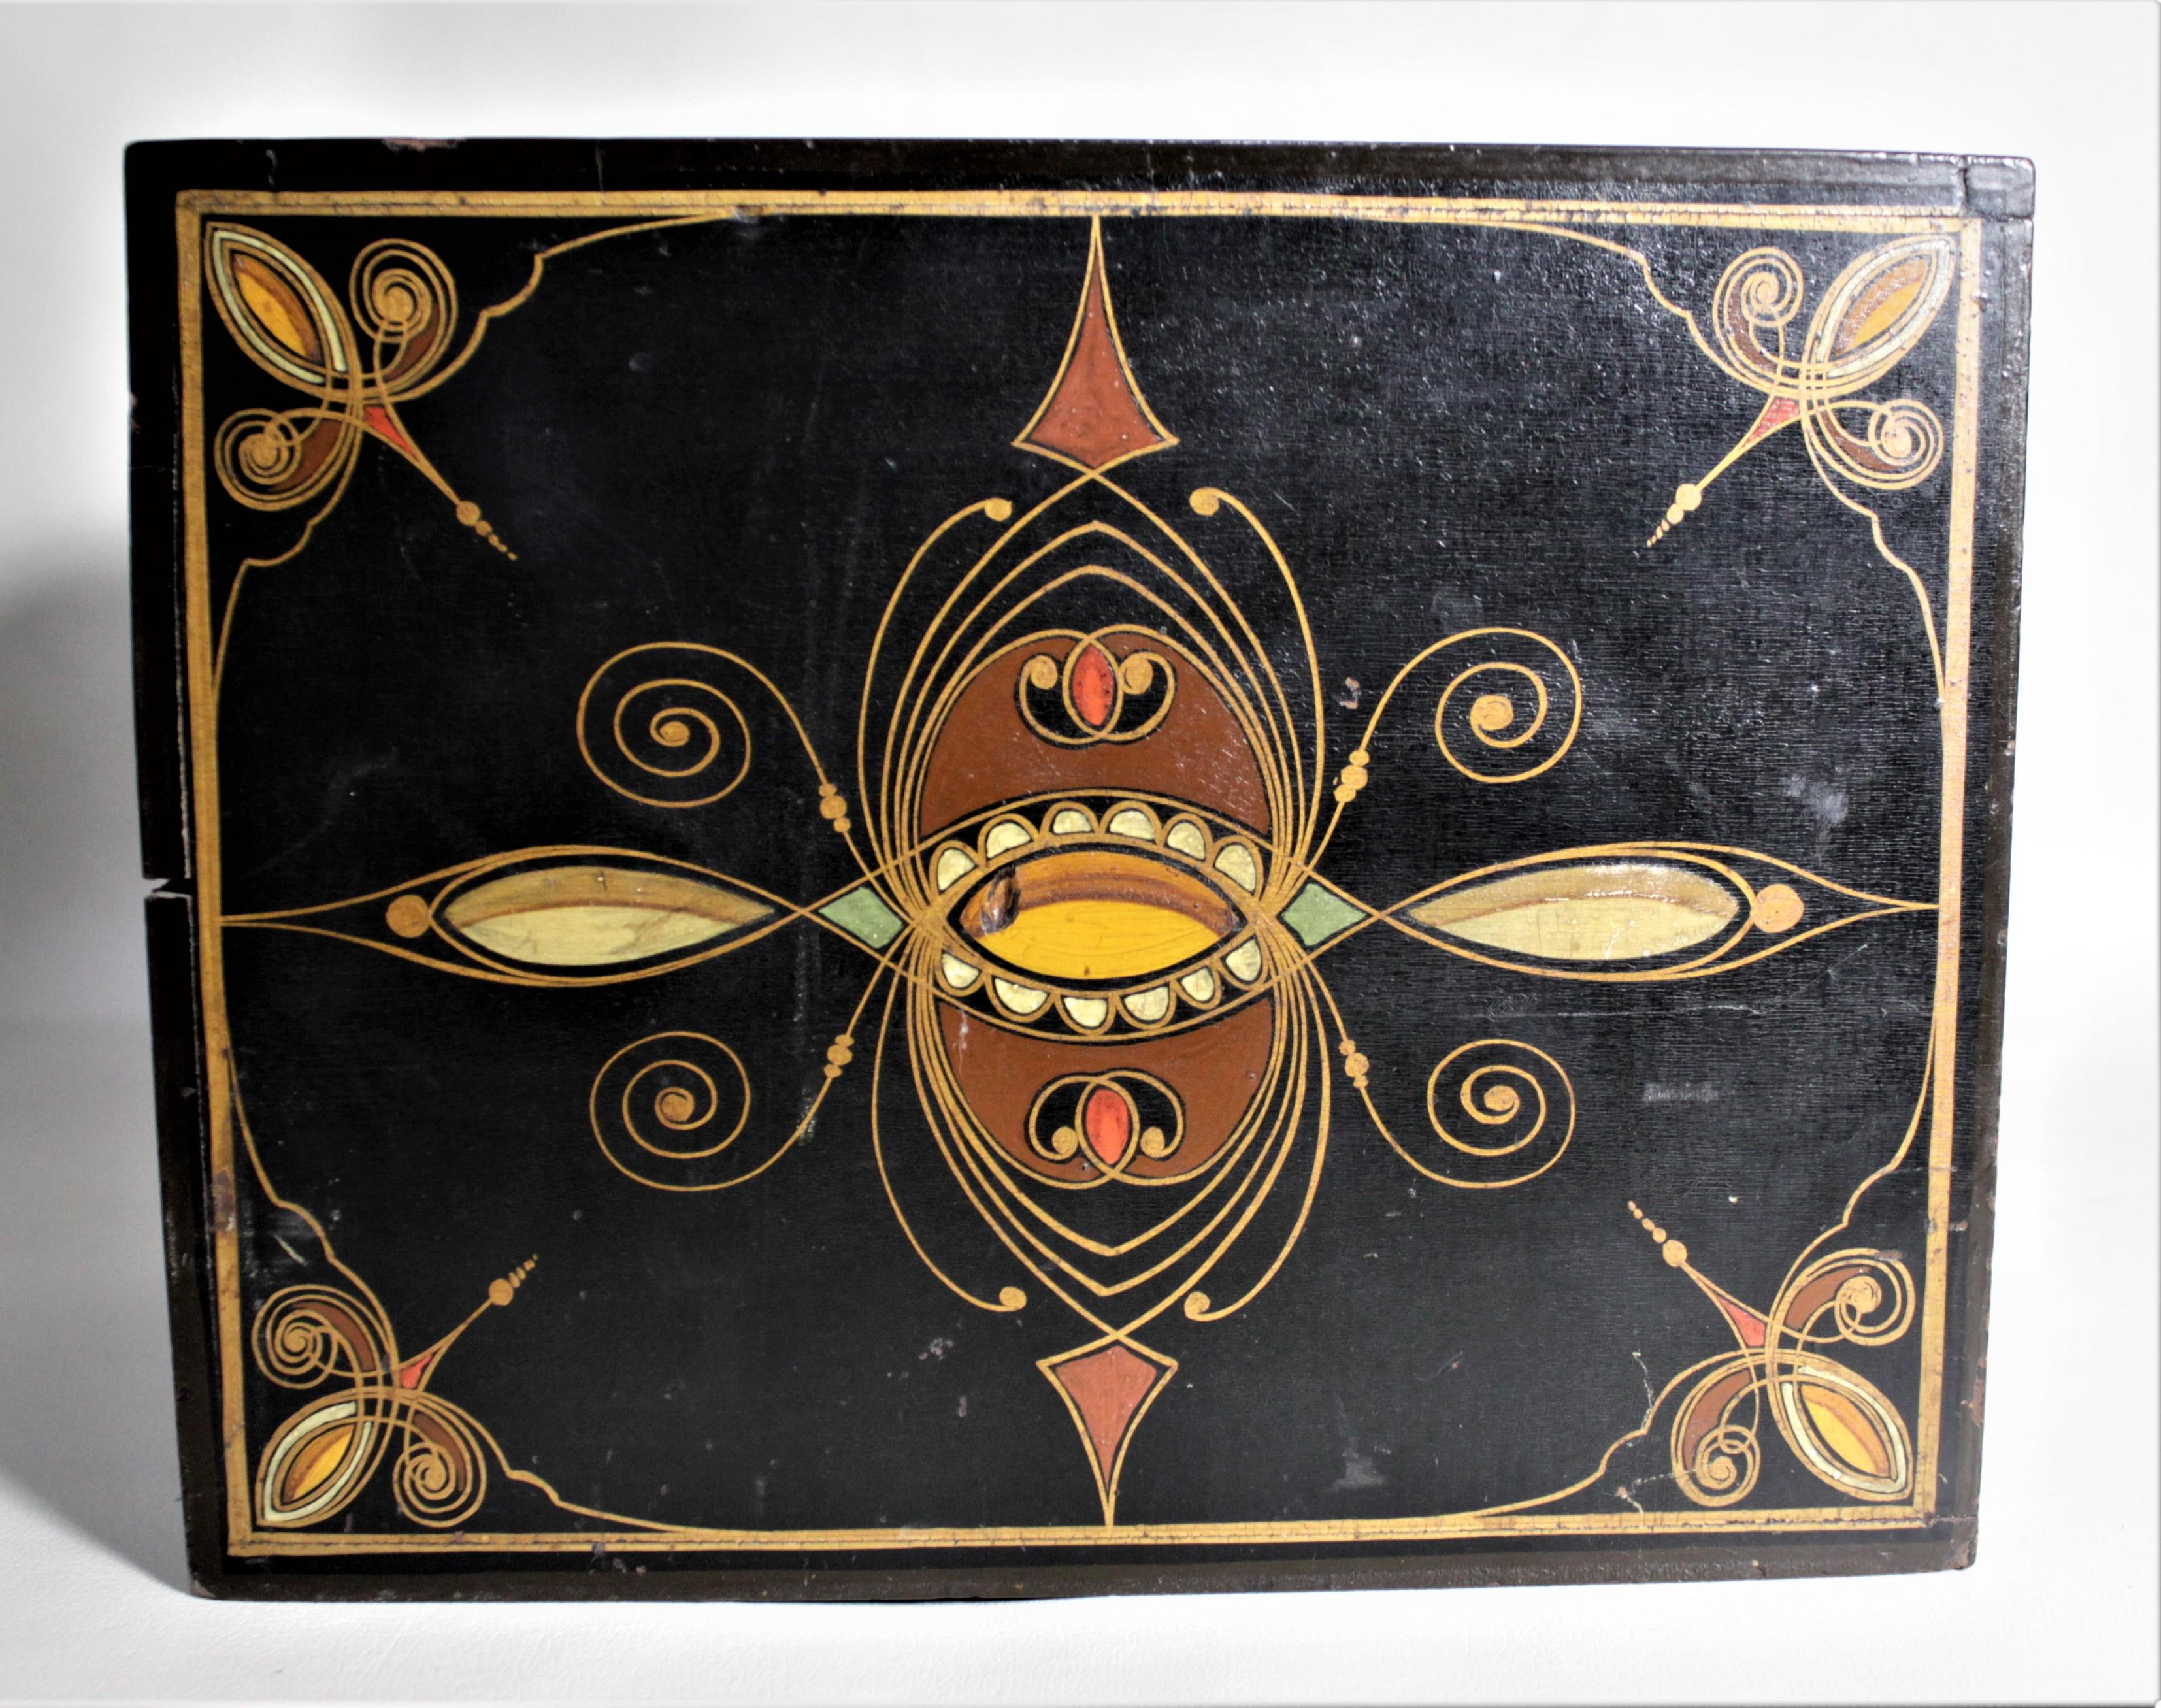 This antique four drawer wooden jewelry or decorative box is unmarked, but believed to date to the early 20th century. The top and sides of the box are ornately painted with borders and a swirled motif in red, green, and gold on a gloss black